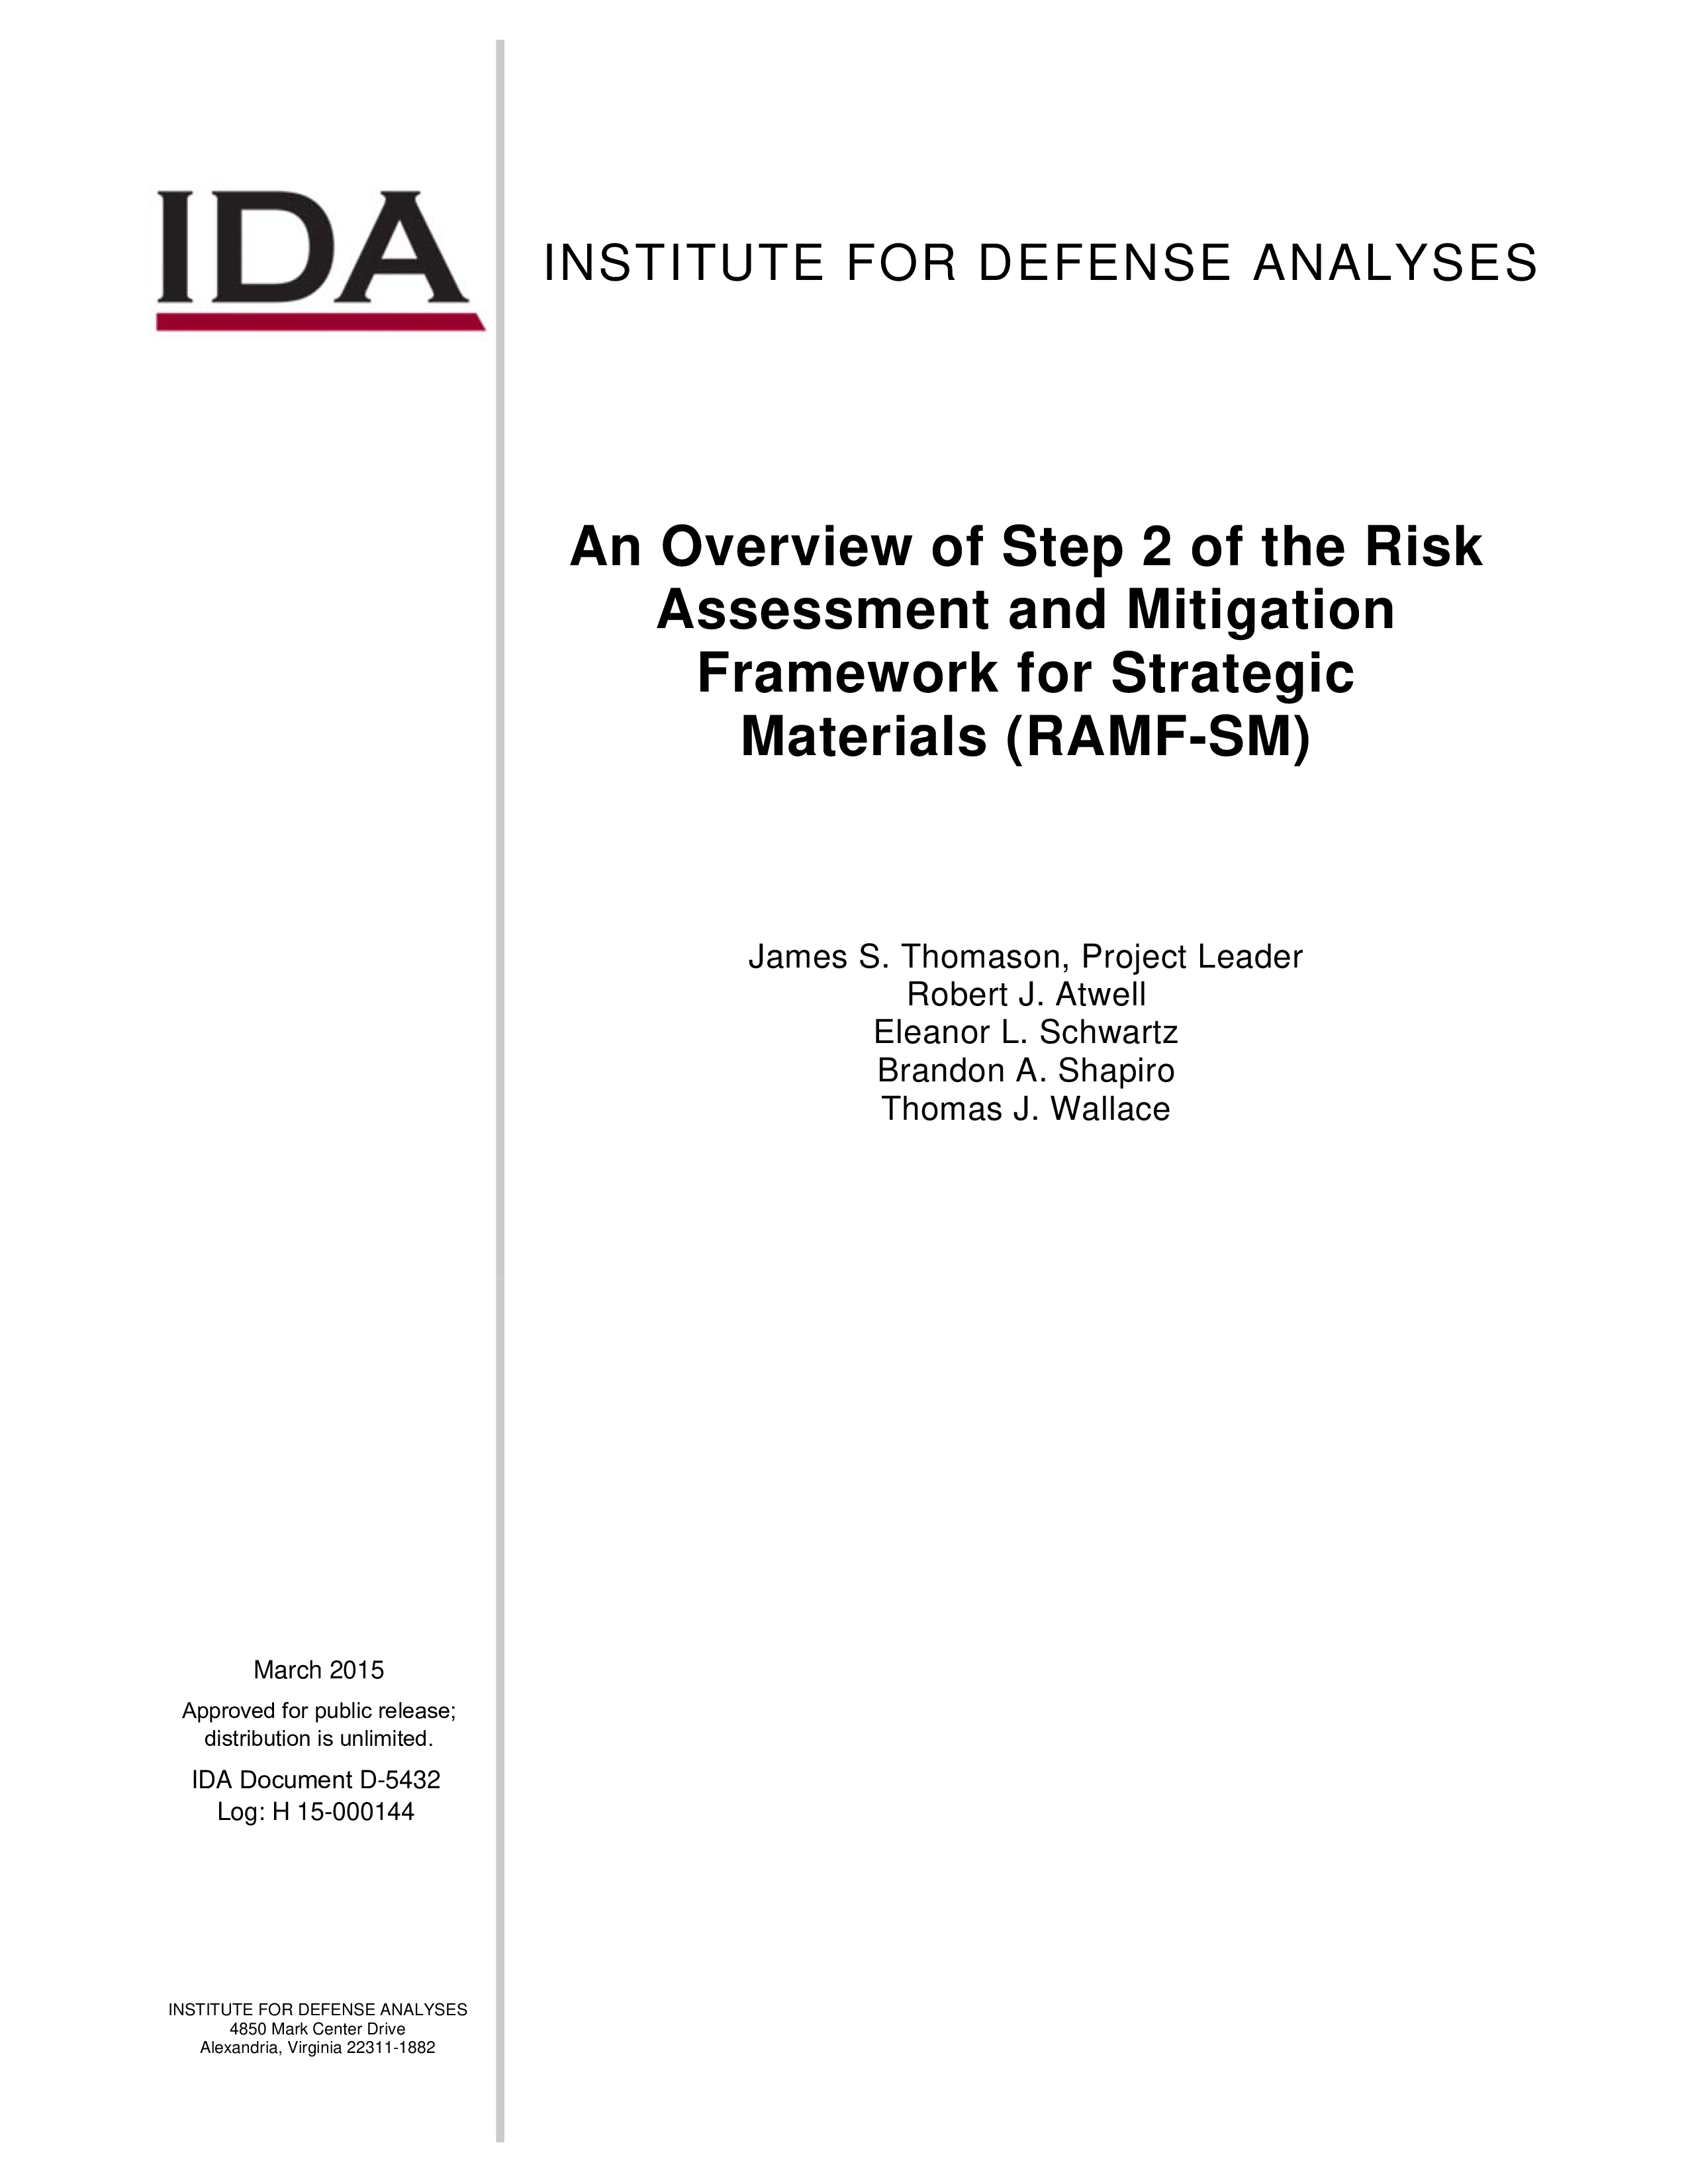 An Overview Of Step 2 Of The Risk Assessment And Mitigation Framework For Strategic Materials